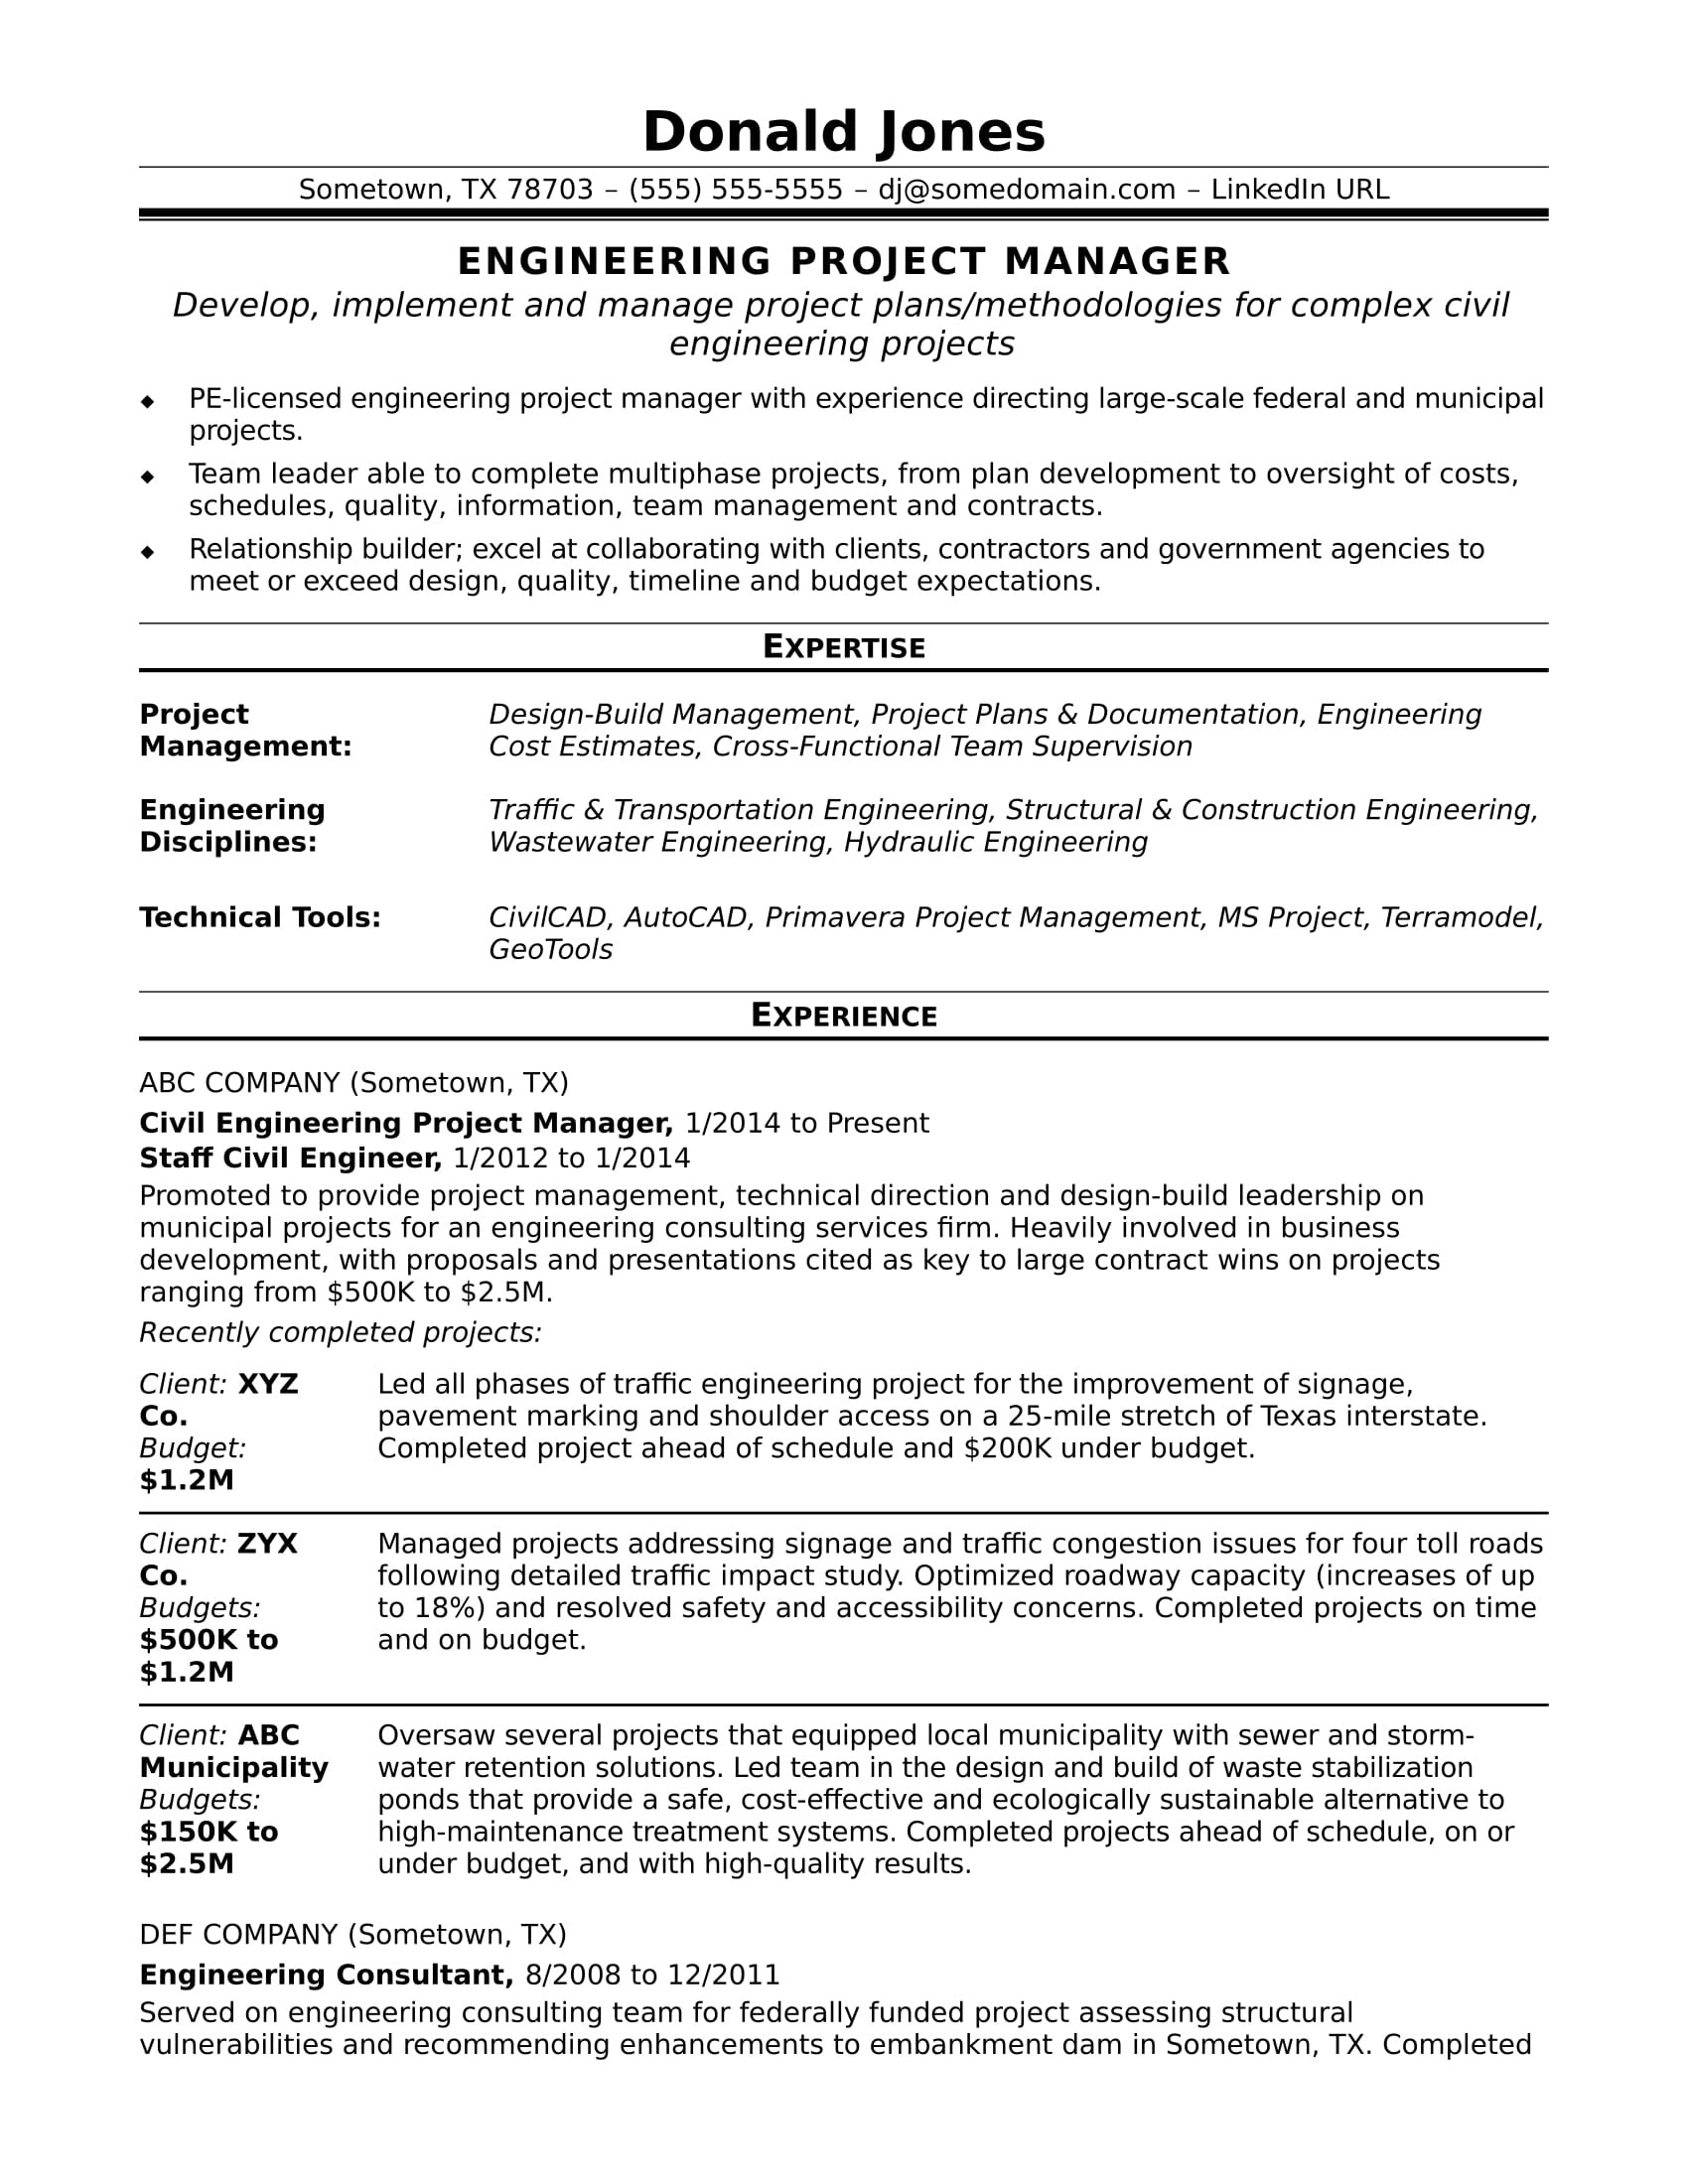 Sample Resume for Entry Level Project Management Sample Resume for A Midlevel Engineering Project Manager Monster.com